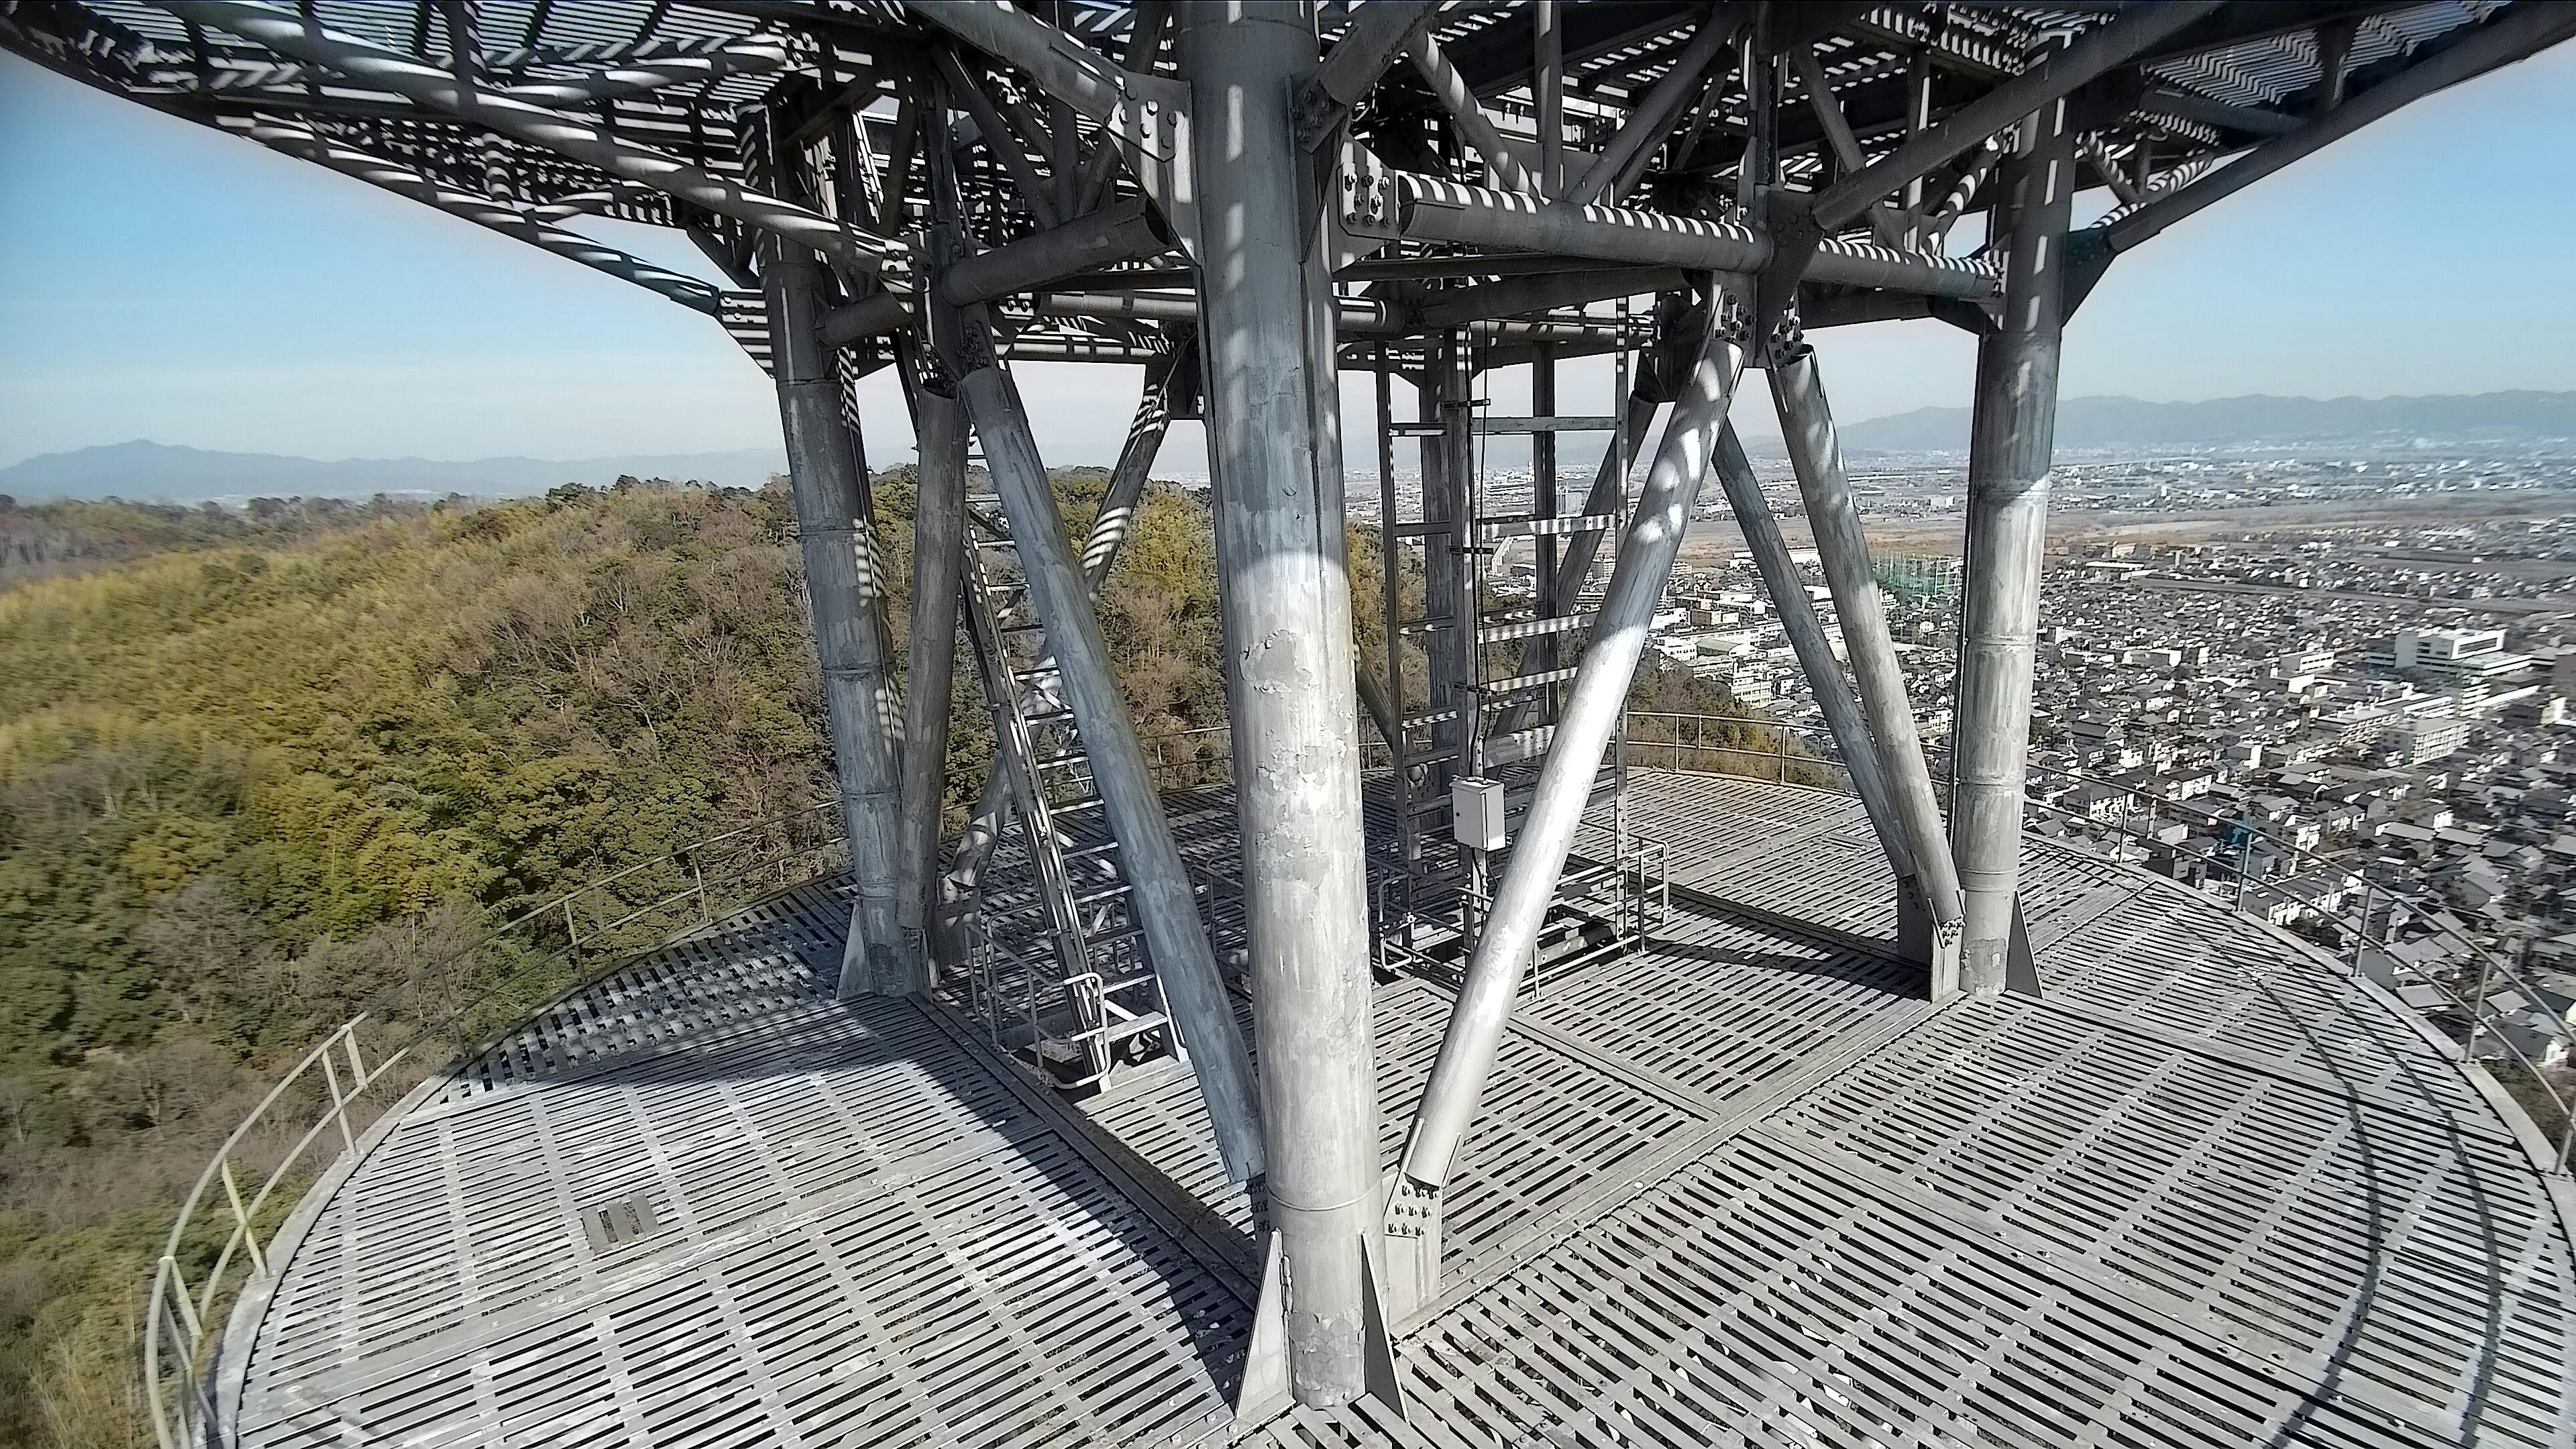 Inspection of a section of a communication tower